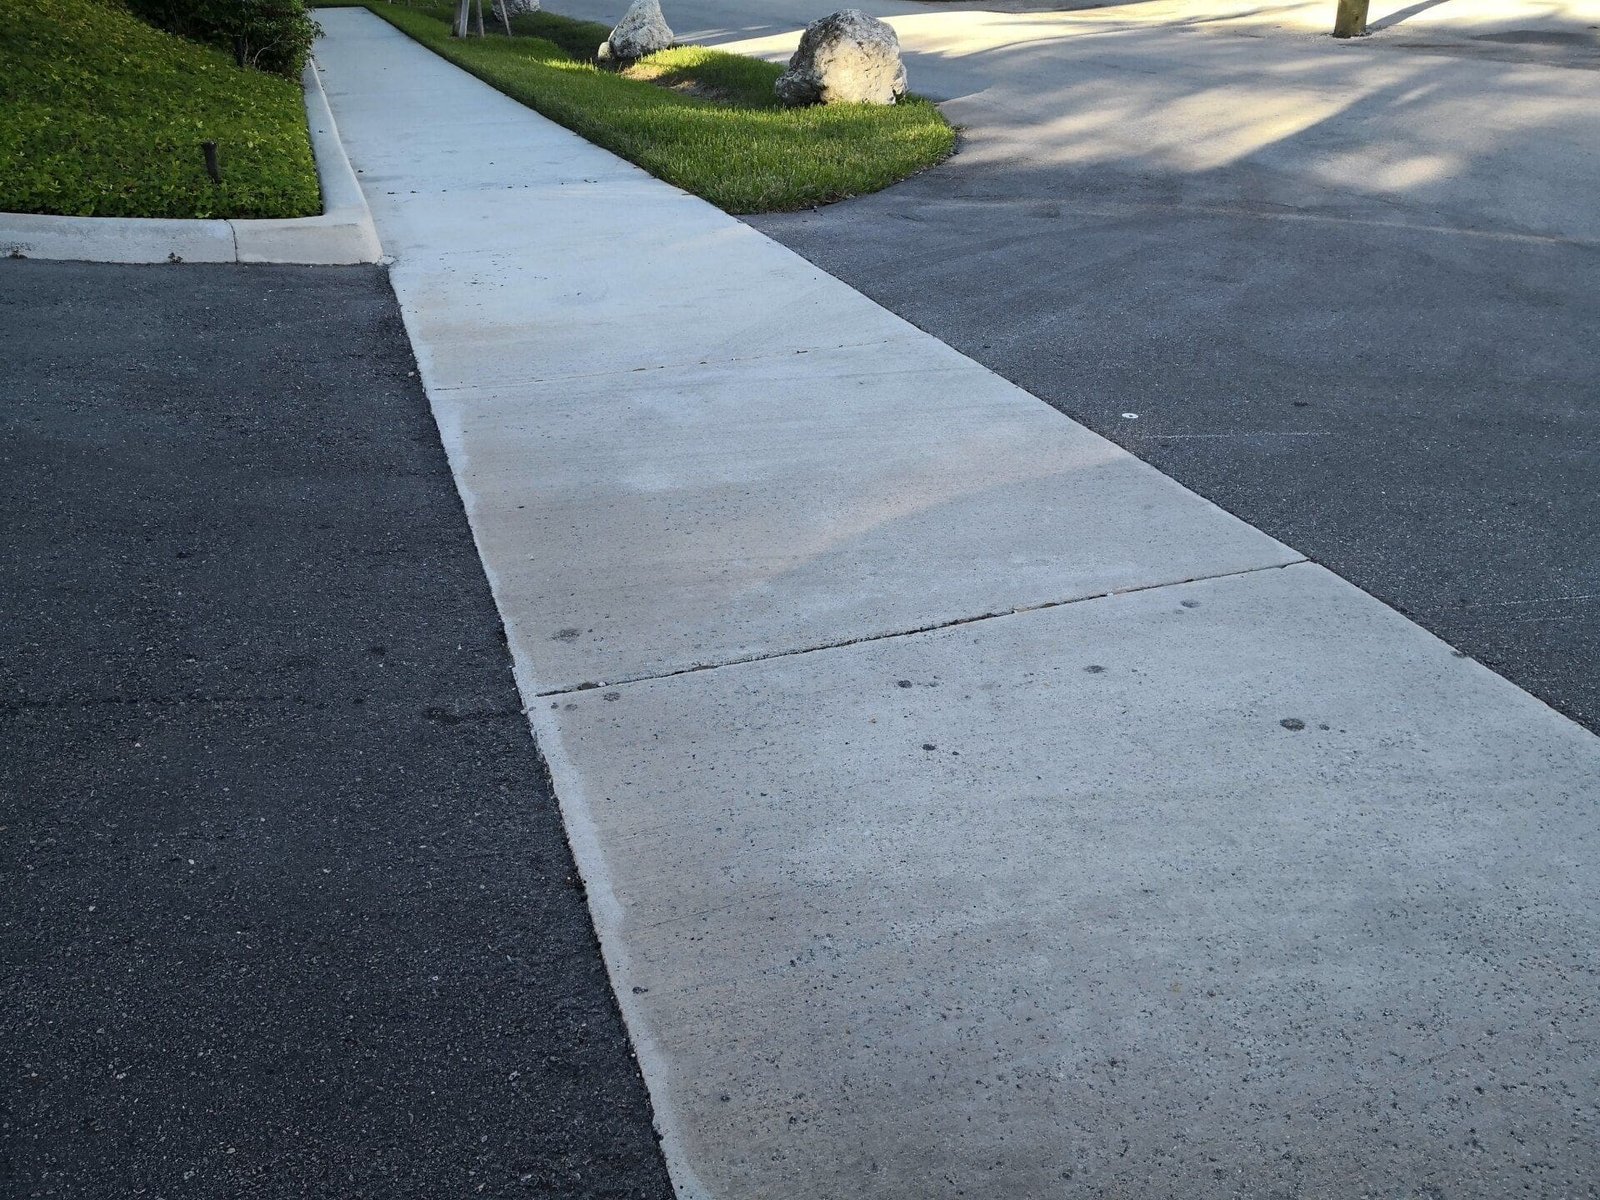 asphalt parking lot with concrete sidewalk paved in the middle. photo taken in Coral Springs, FL